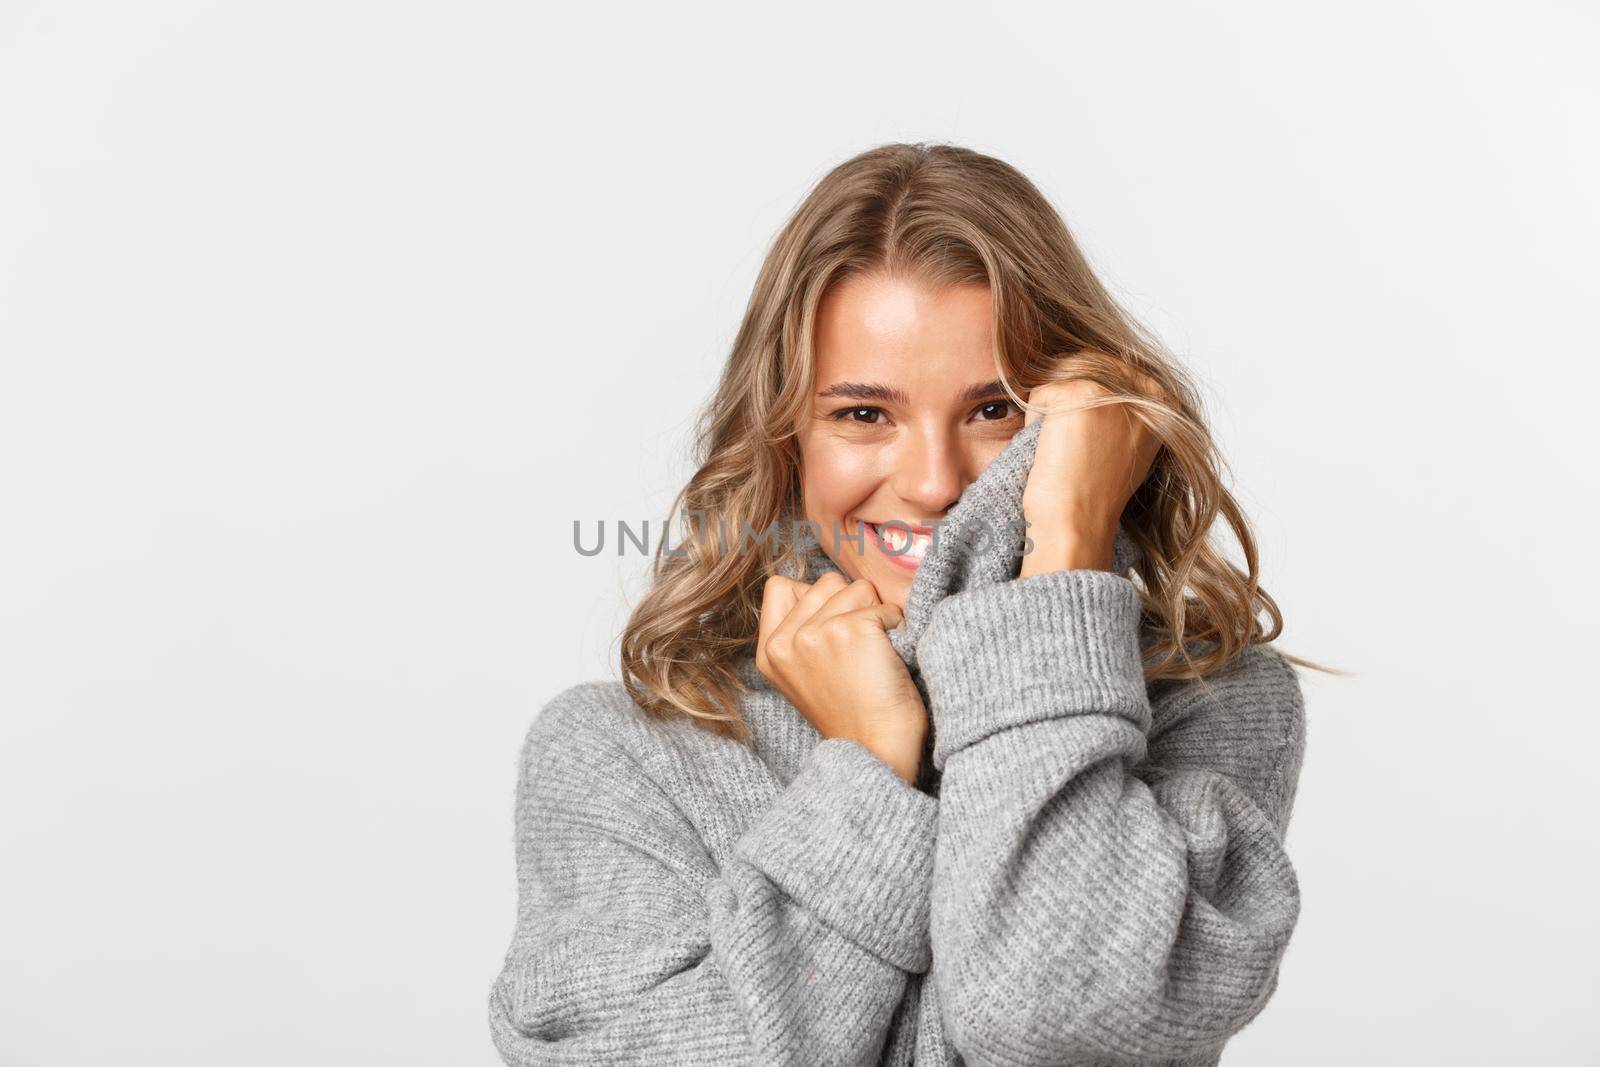 Close-up of beautiful romantic girl, touching soft grey sweater and smiling, standing over white background.